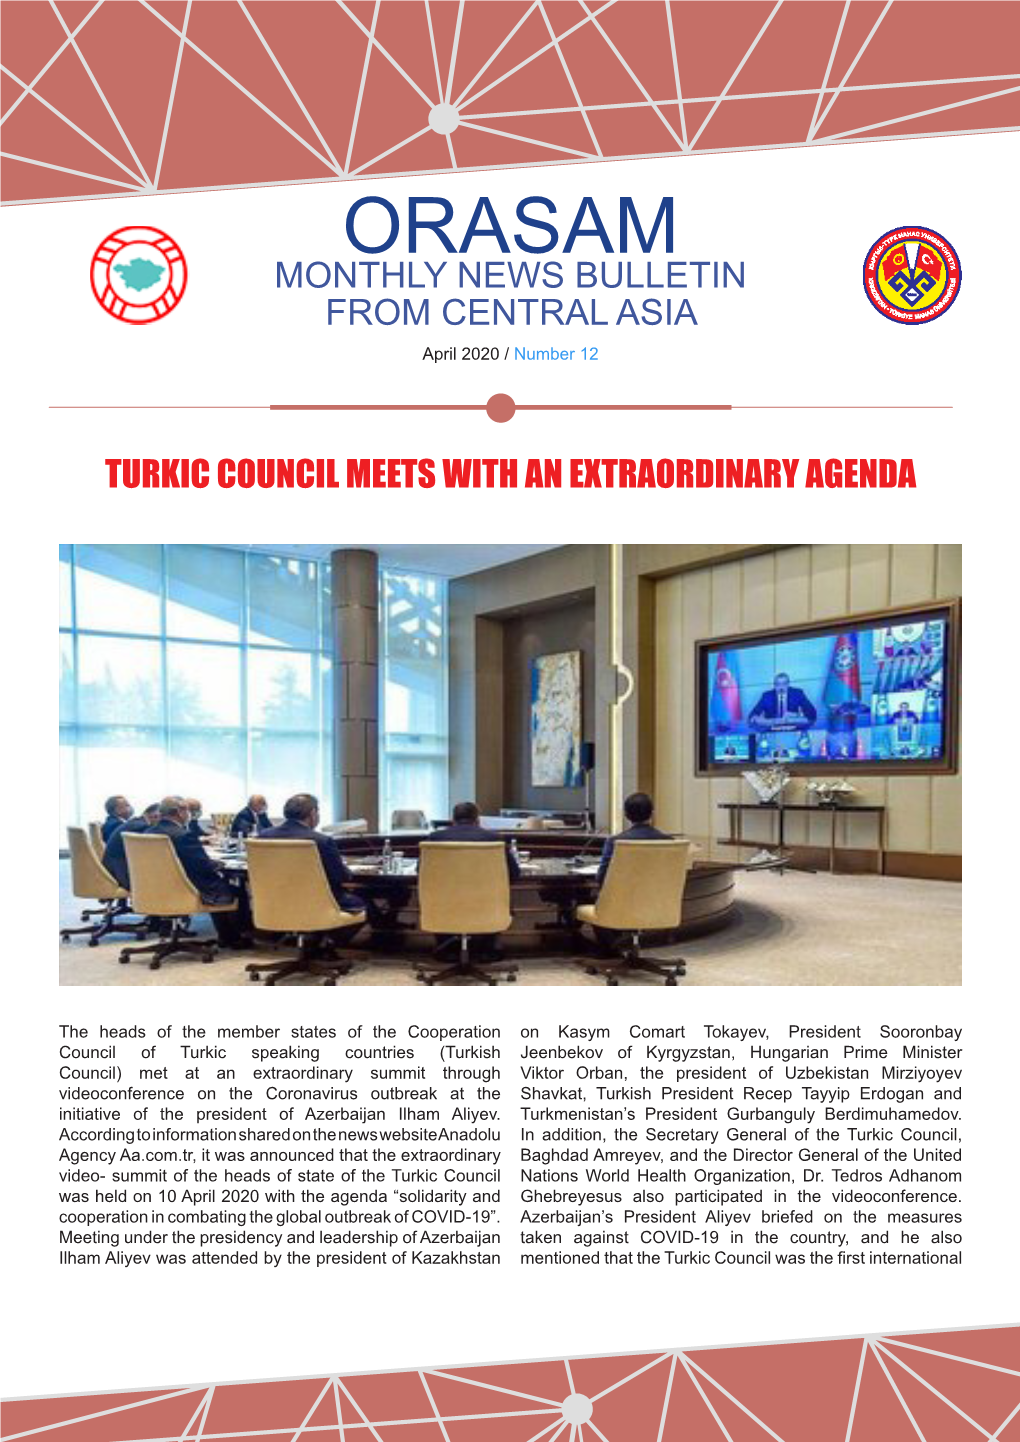 ORASAM MONTHLY NEWS BULLETIN from CENTRAL ASIA April 2020 / Number 12